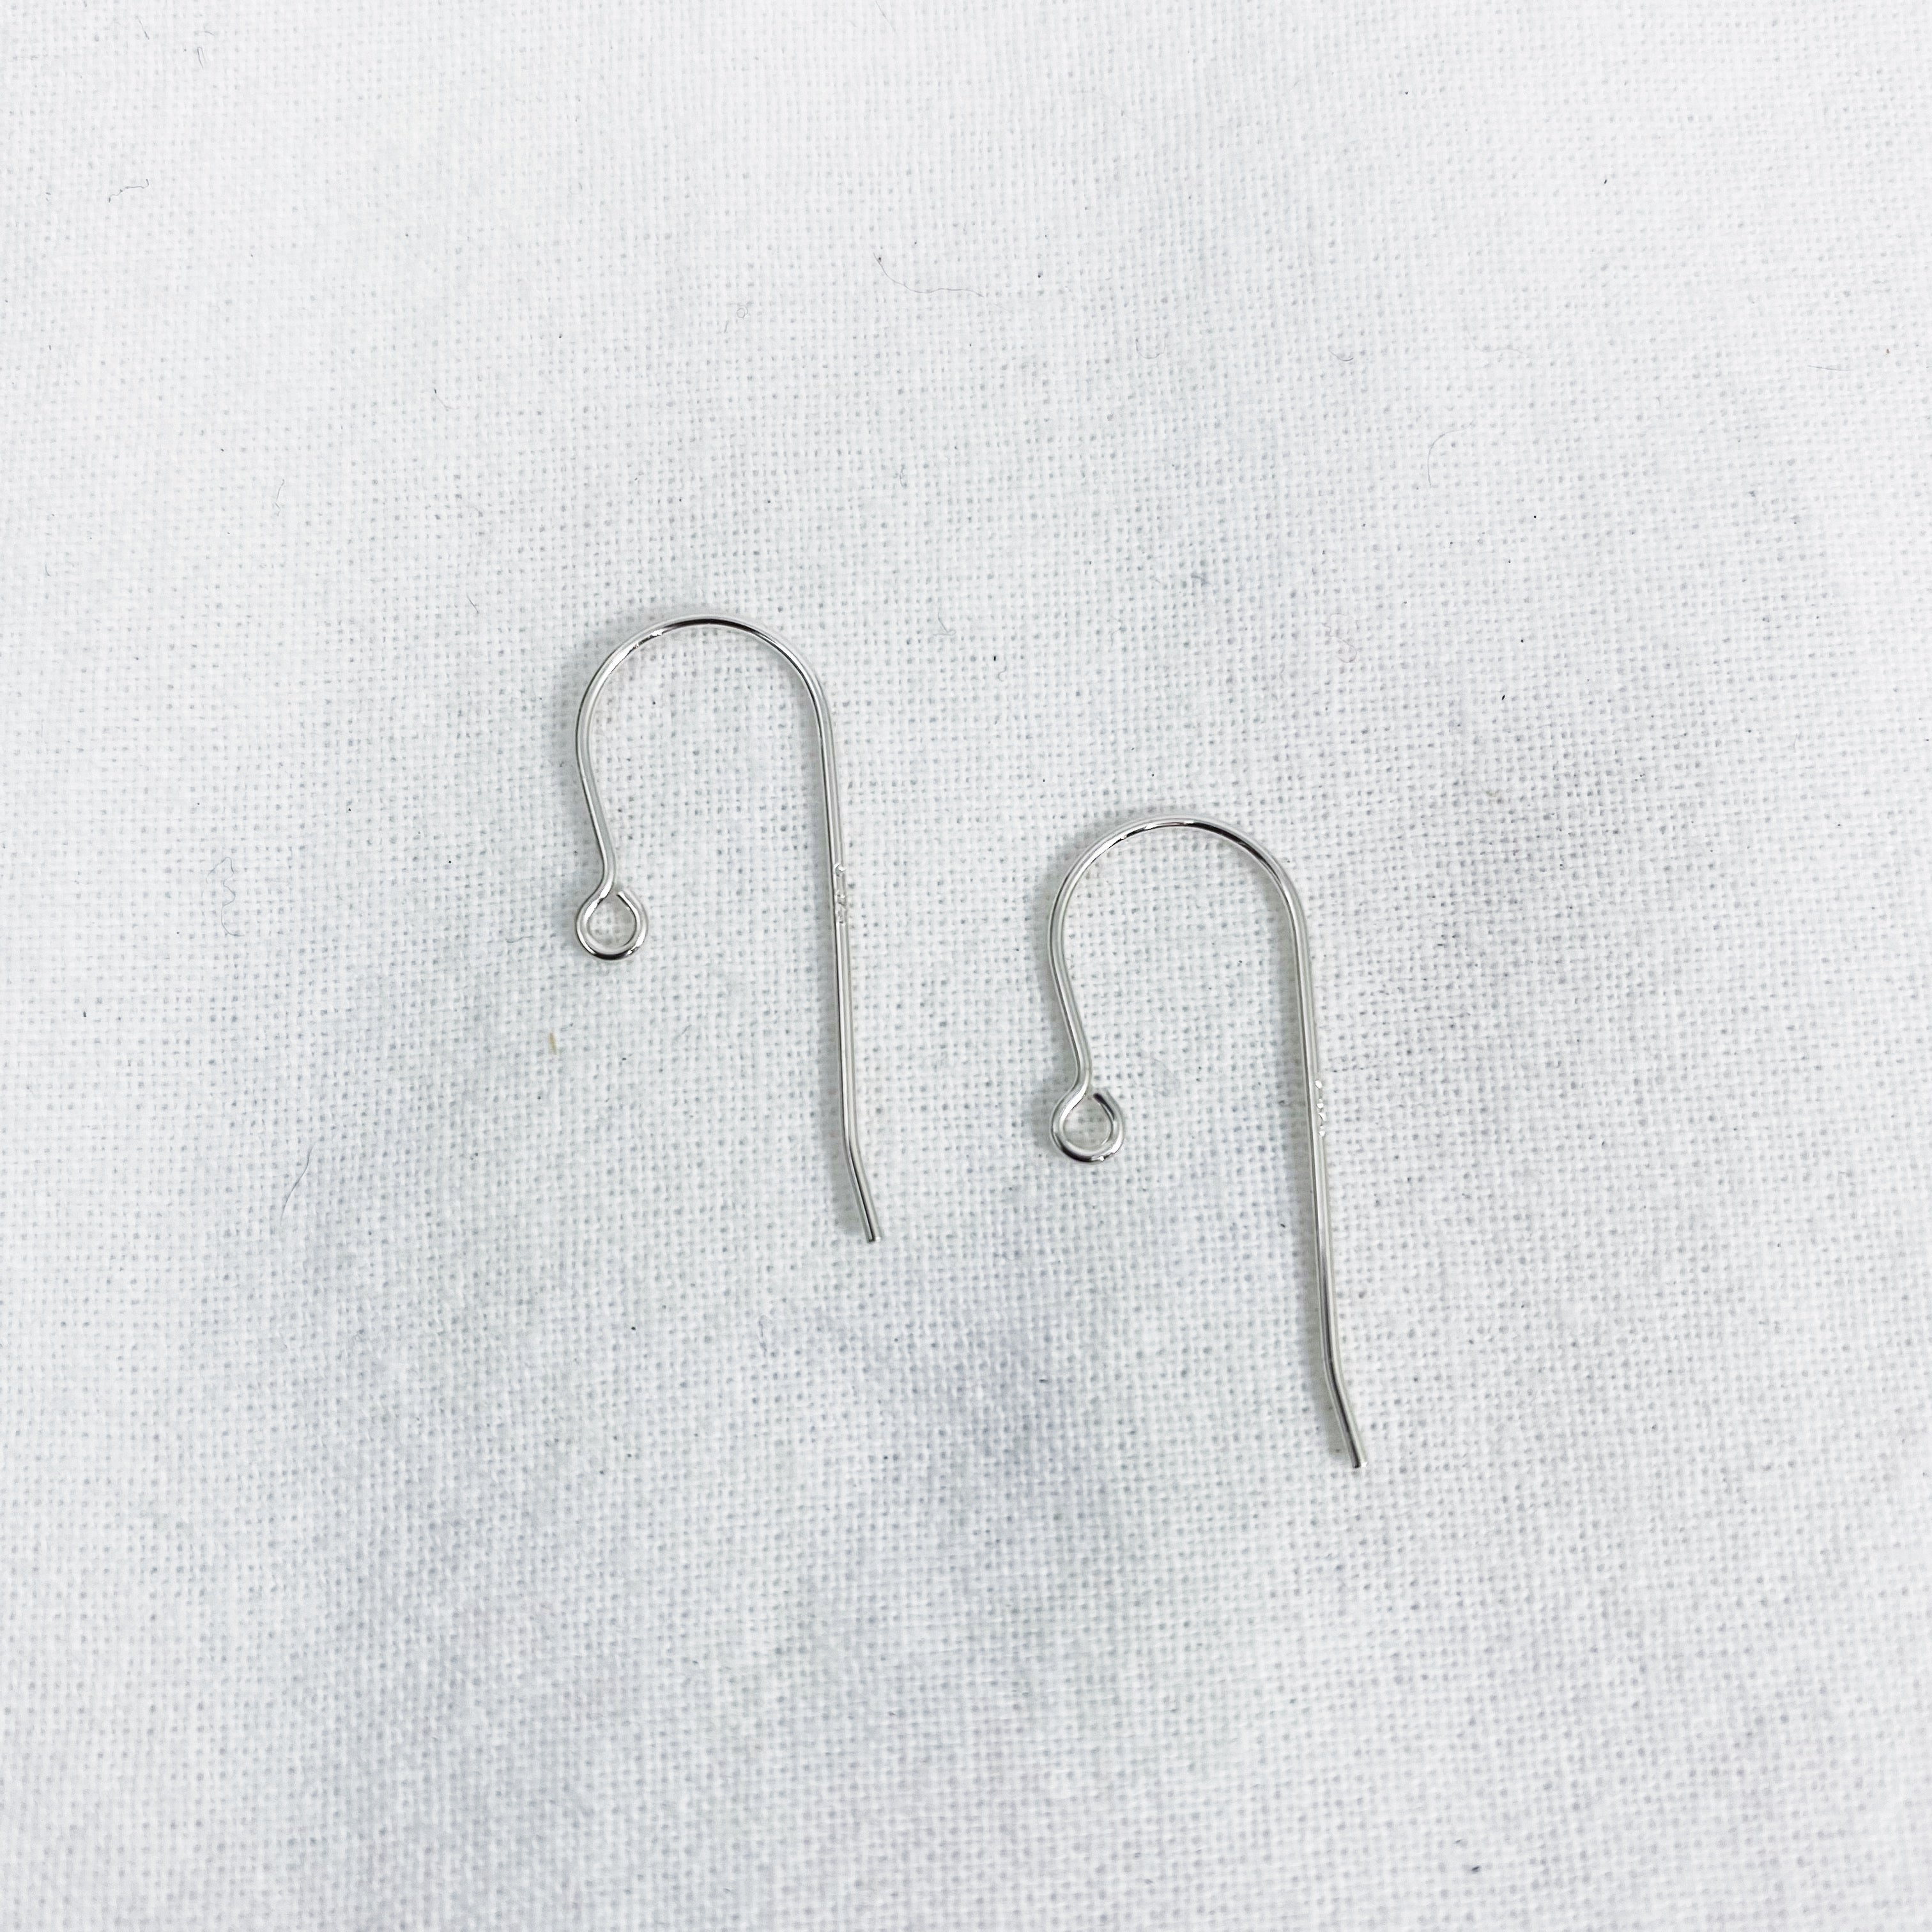 Sterling Silver U-shaped Earring Hook With Screw Peg Mountings for